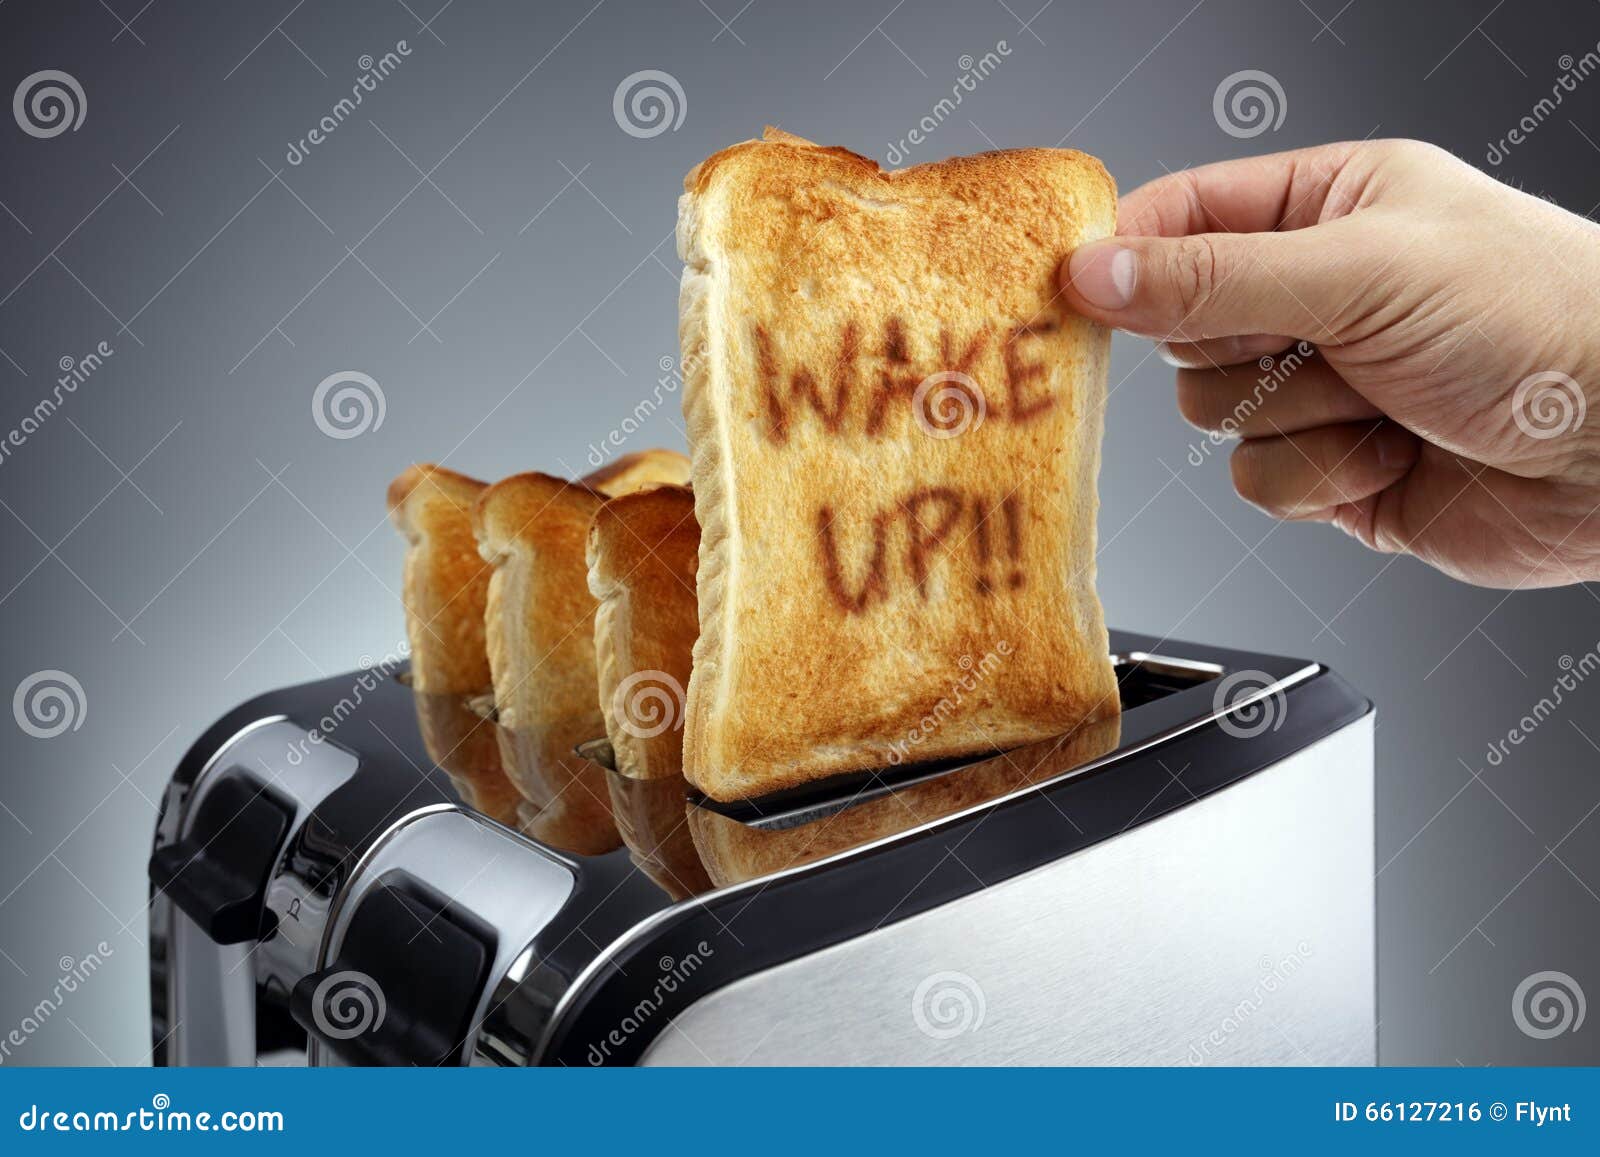 https://thumbs.dreamstime.com/z/wake-up-toasted-bread-toaster-good-morning-slice-motivation-to-get-started-66127216.jpg